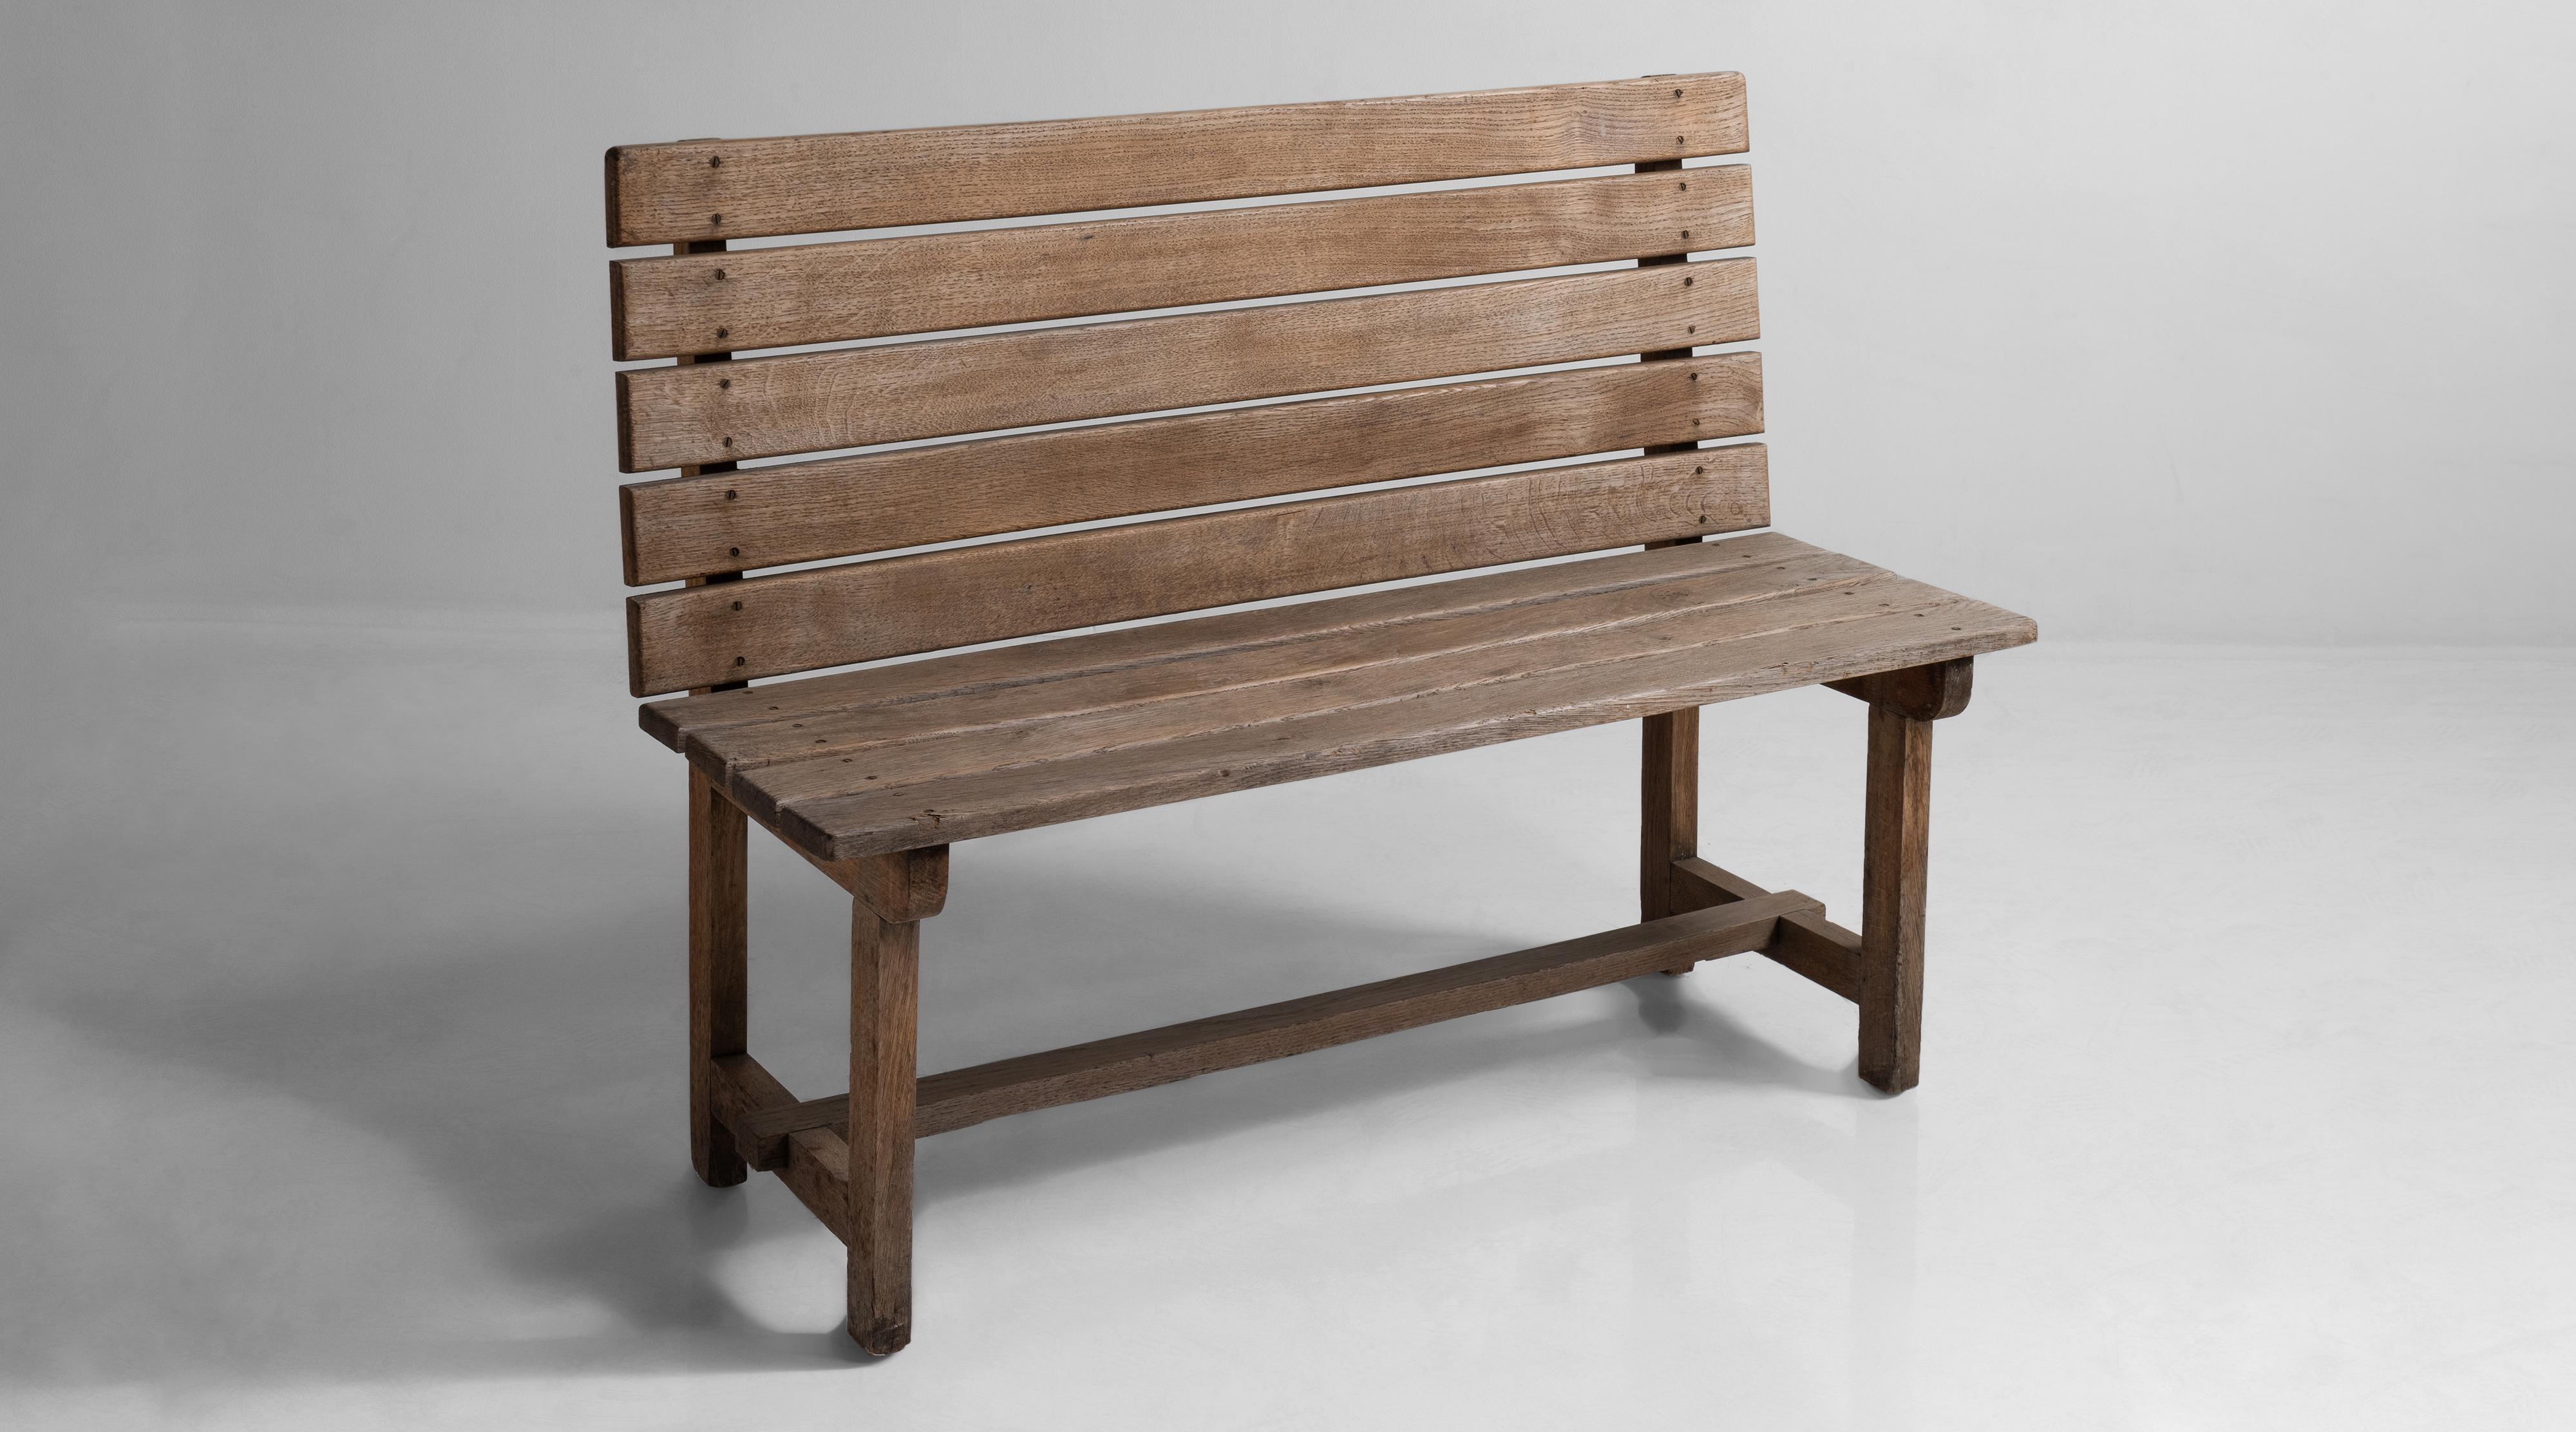 Slatted oak back rest and seat on square legs.


Measures: 47.25” W x 17.75” D x 35